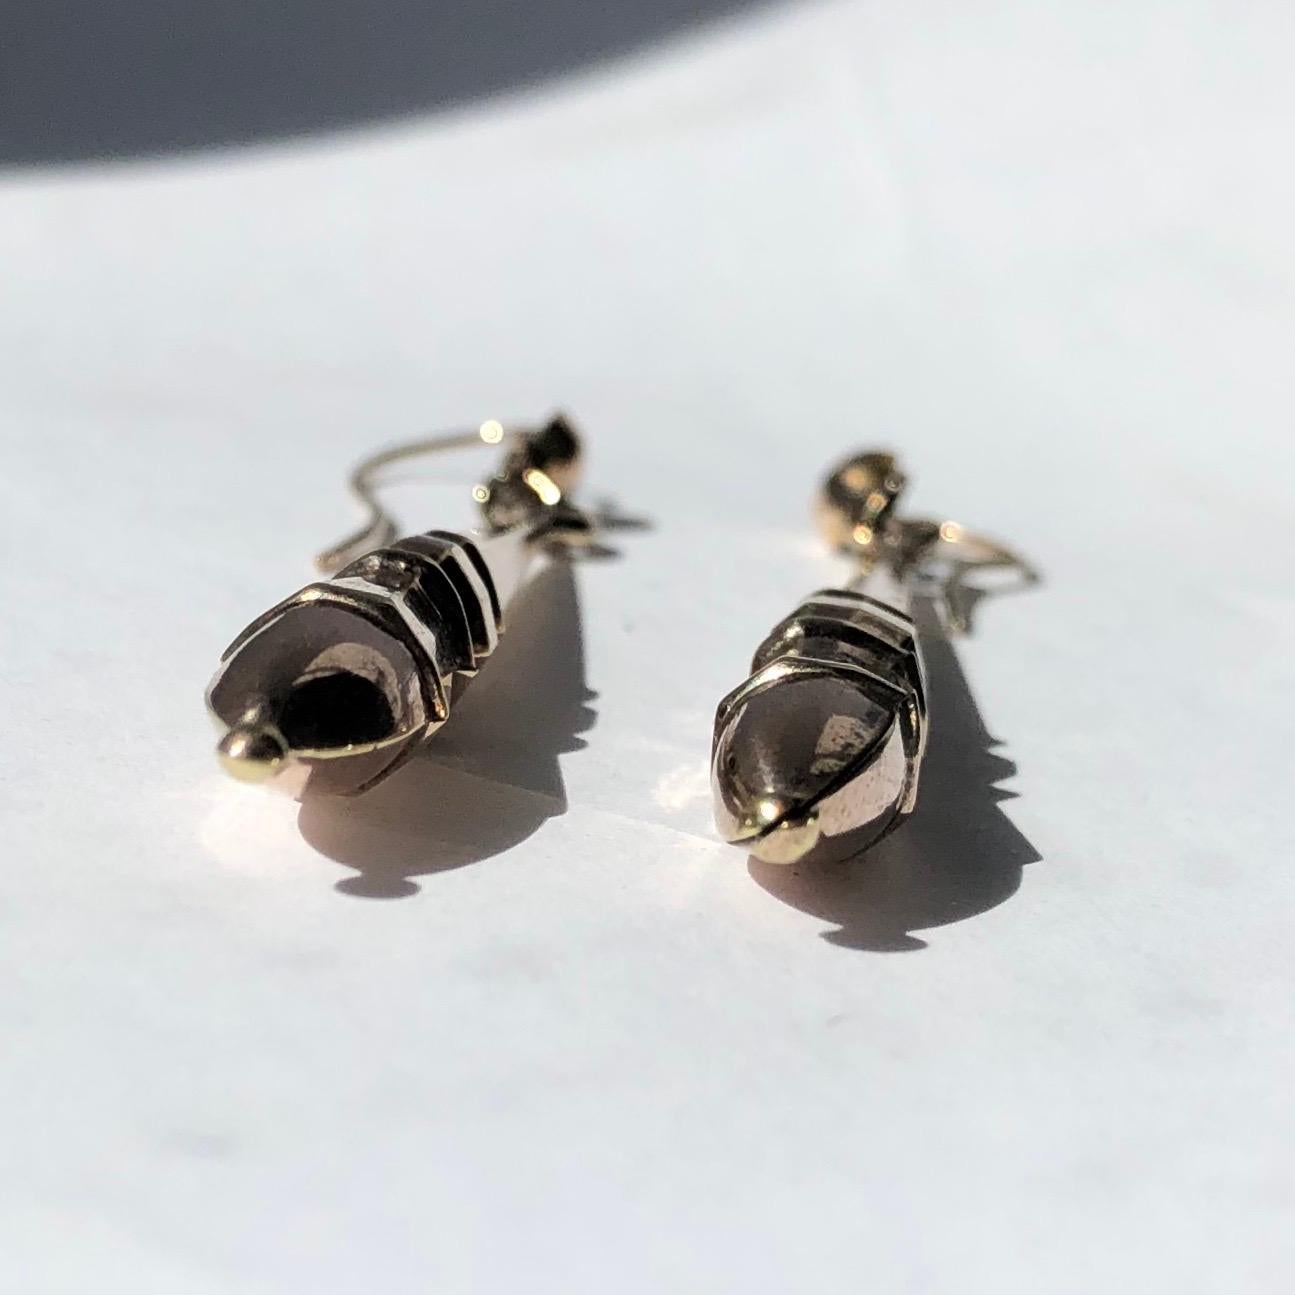 A pair of stunning Victorian torpedo earrings. Each is earring has geo shaped detail moulded in the 9ct gold. 

Torpedo Length: 43mm
Drop From Ear: 58mm

Weight: 3.05g